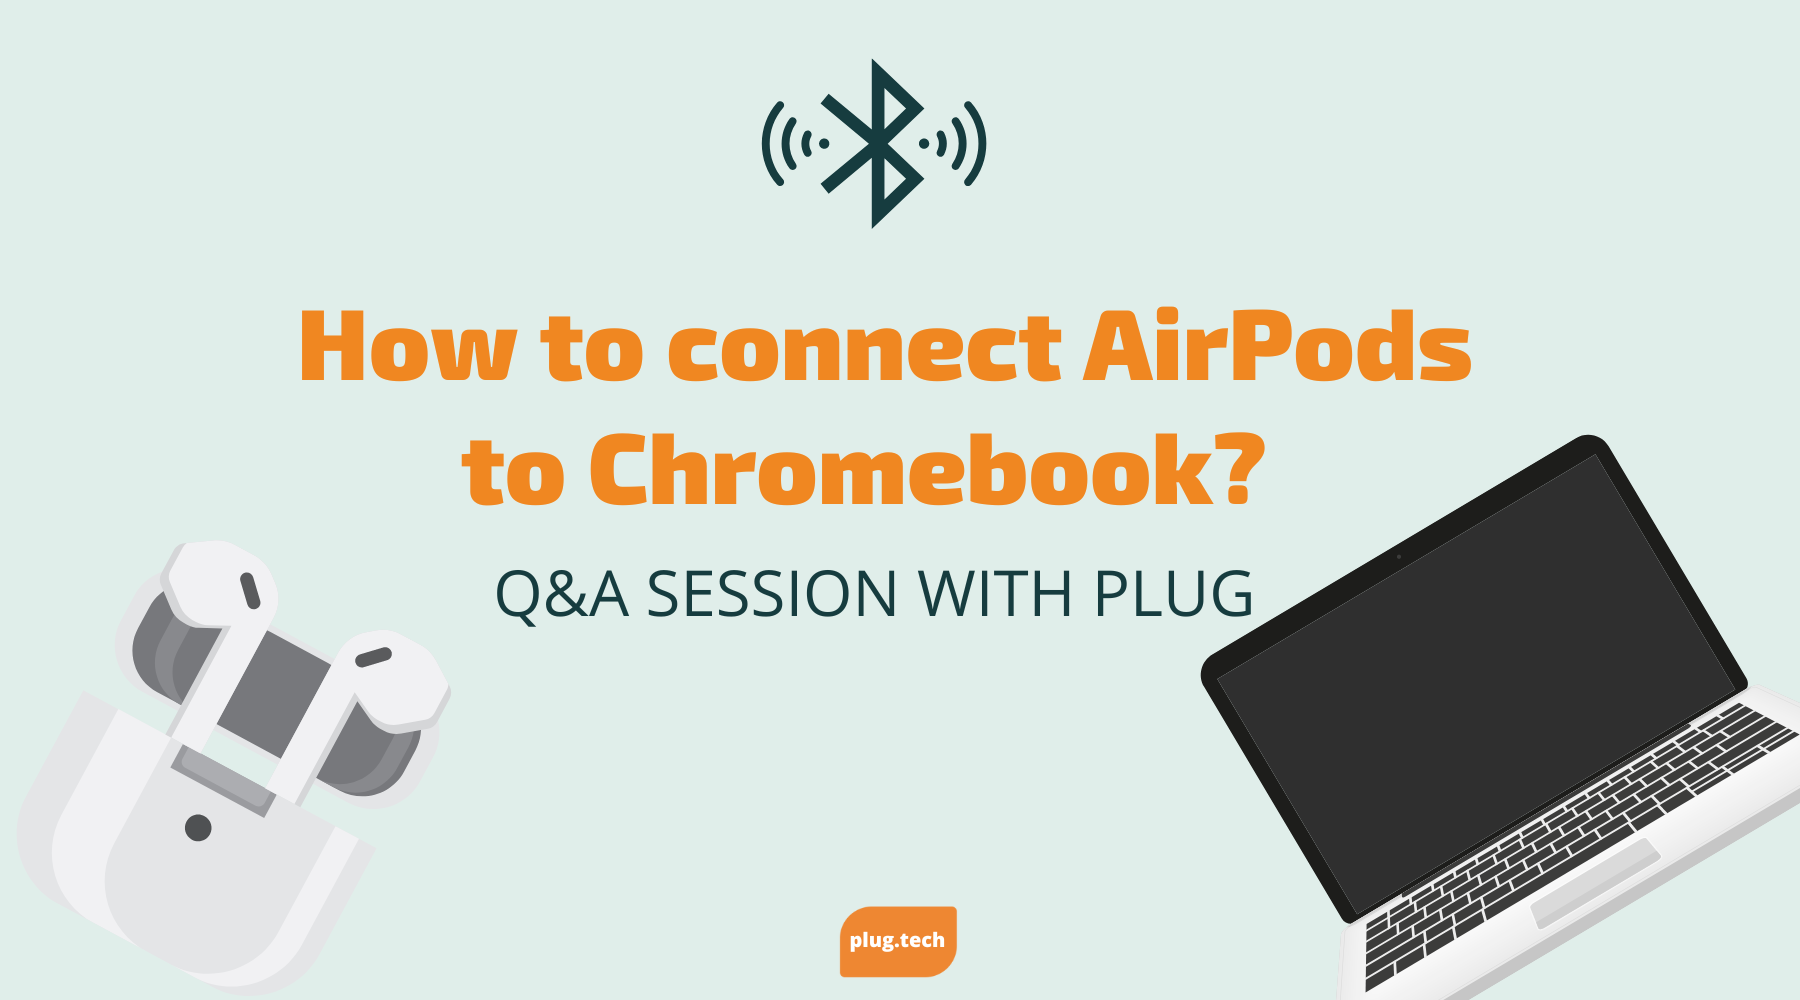 How to connect AirPods to Chromebook?